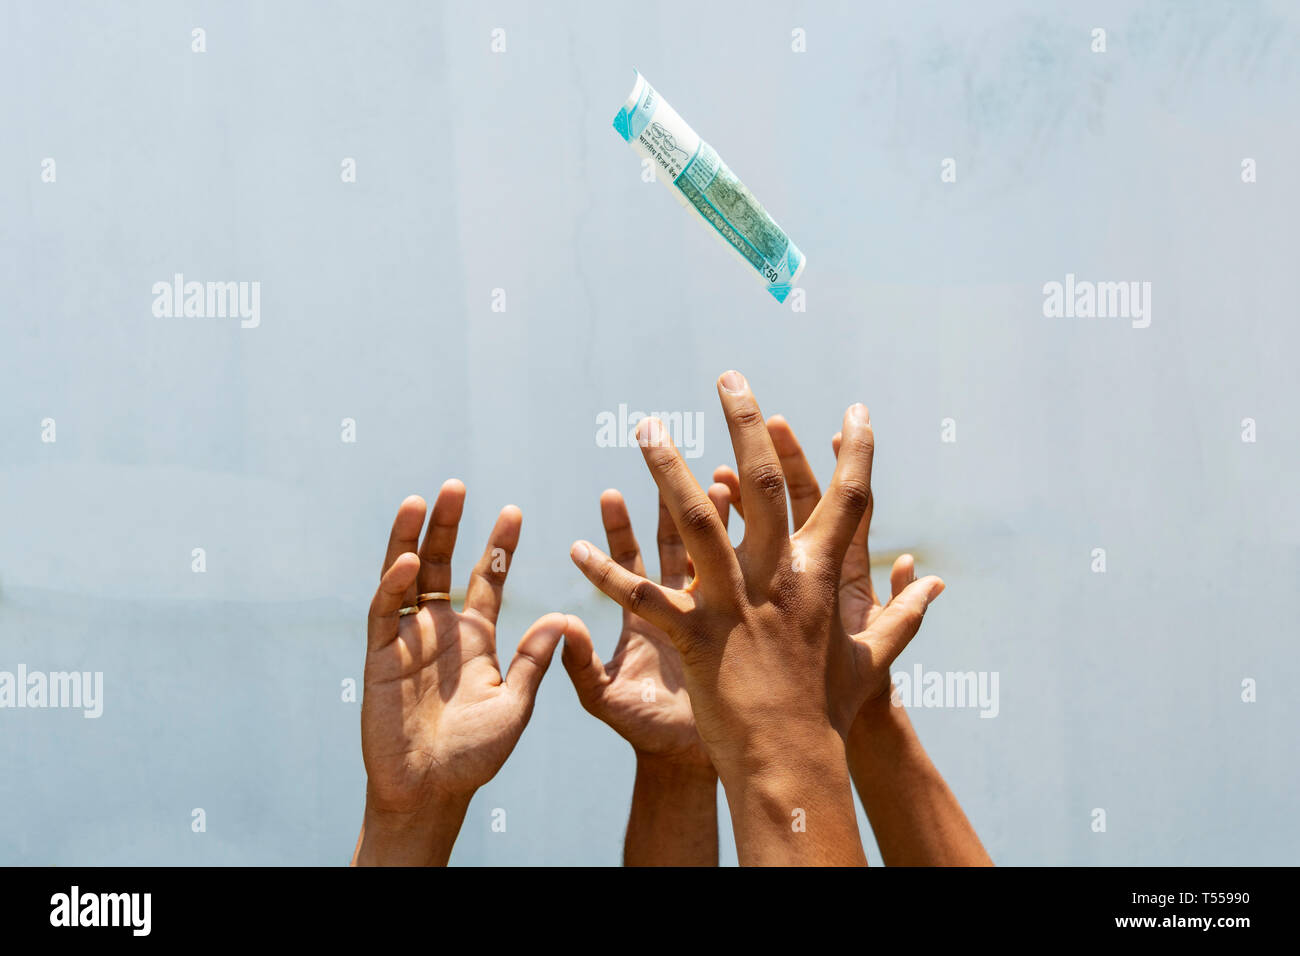 Hands trying to get or catch the flying money on isolated background. Stock Photo